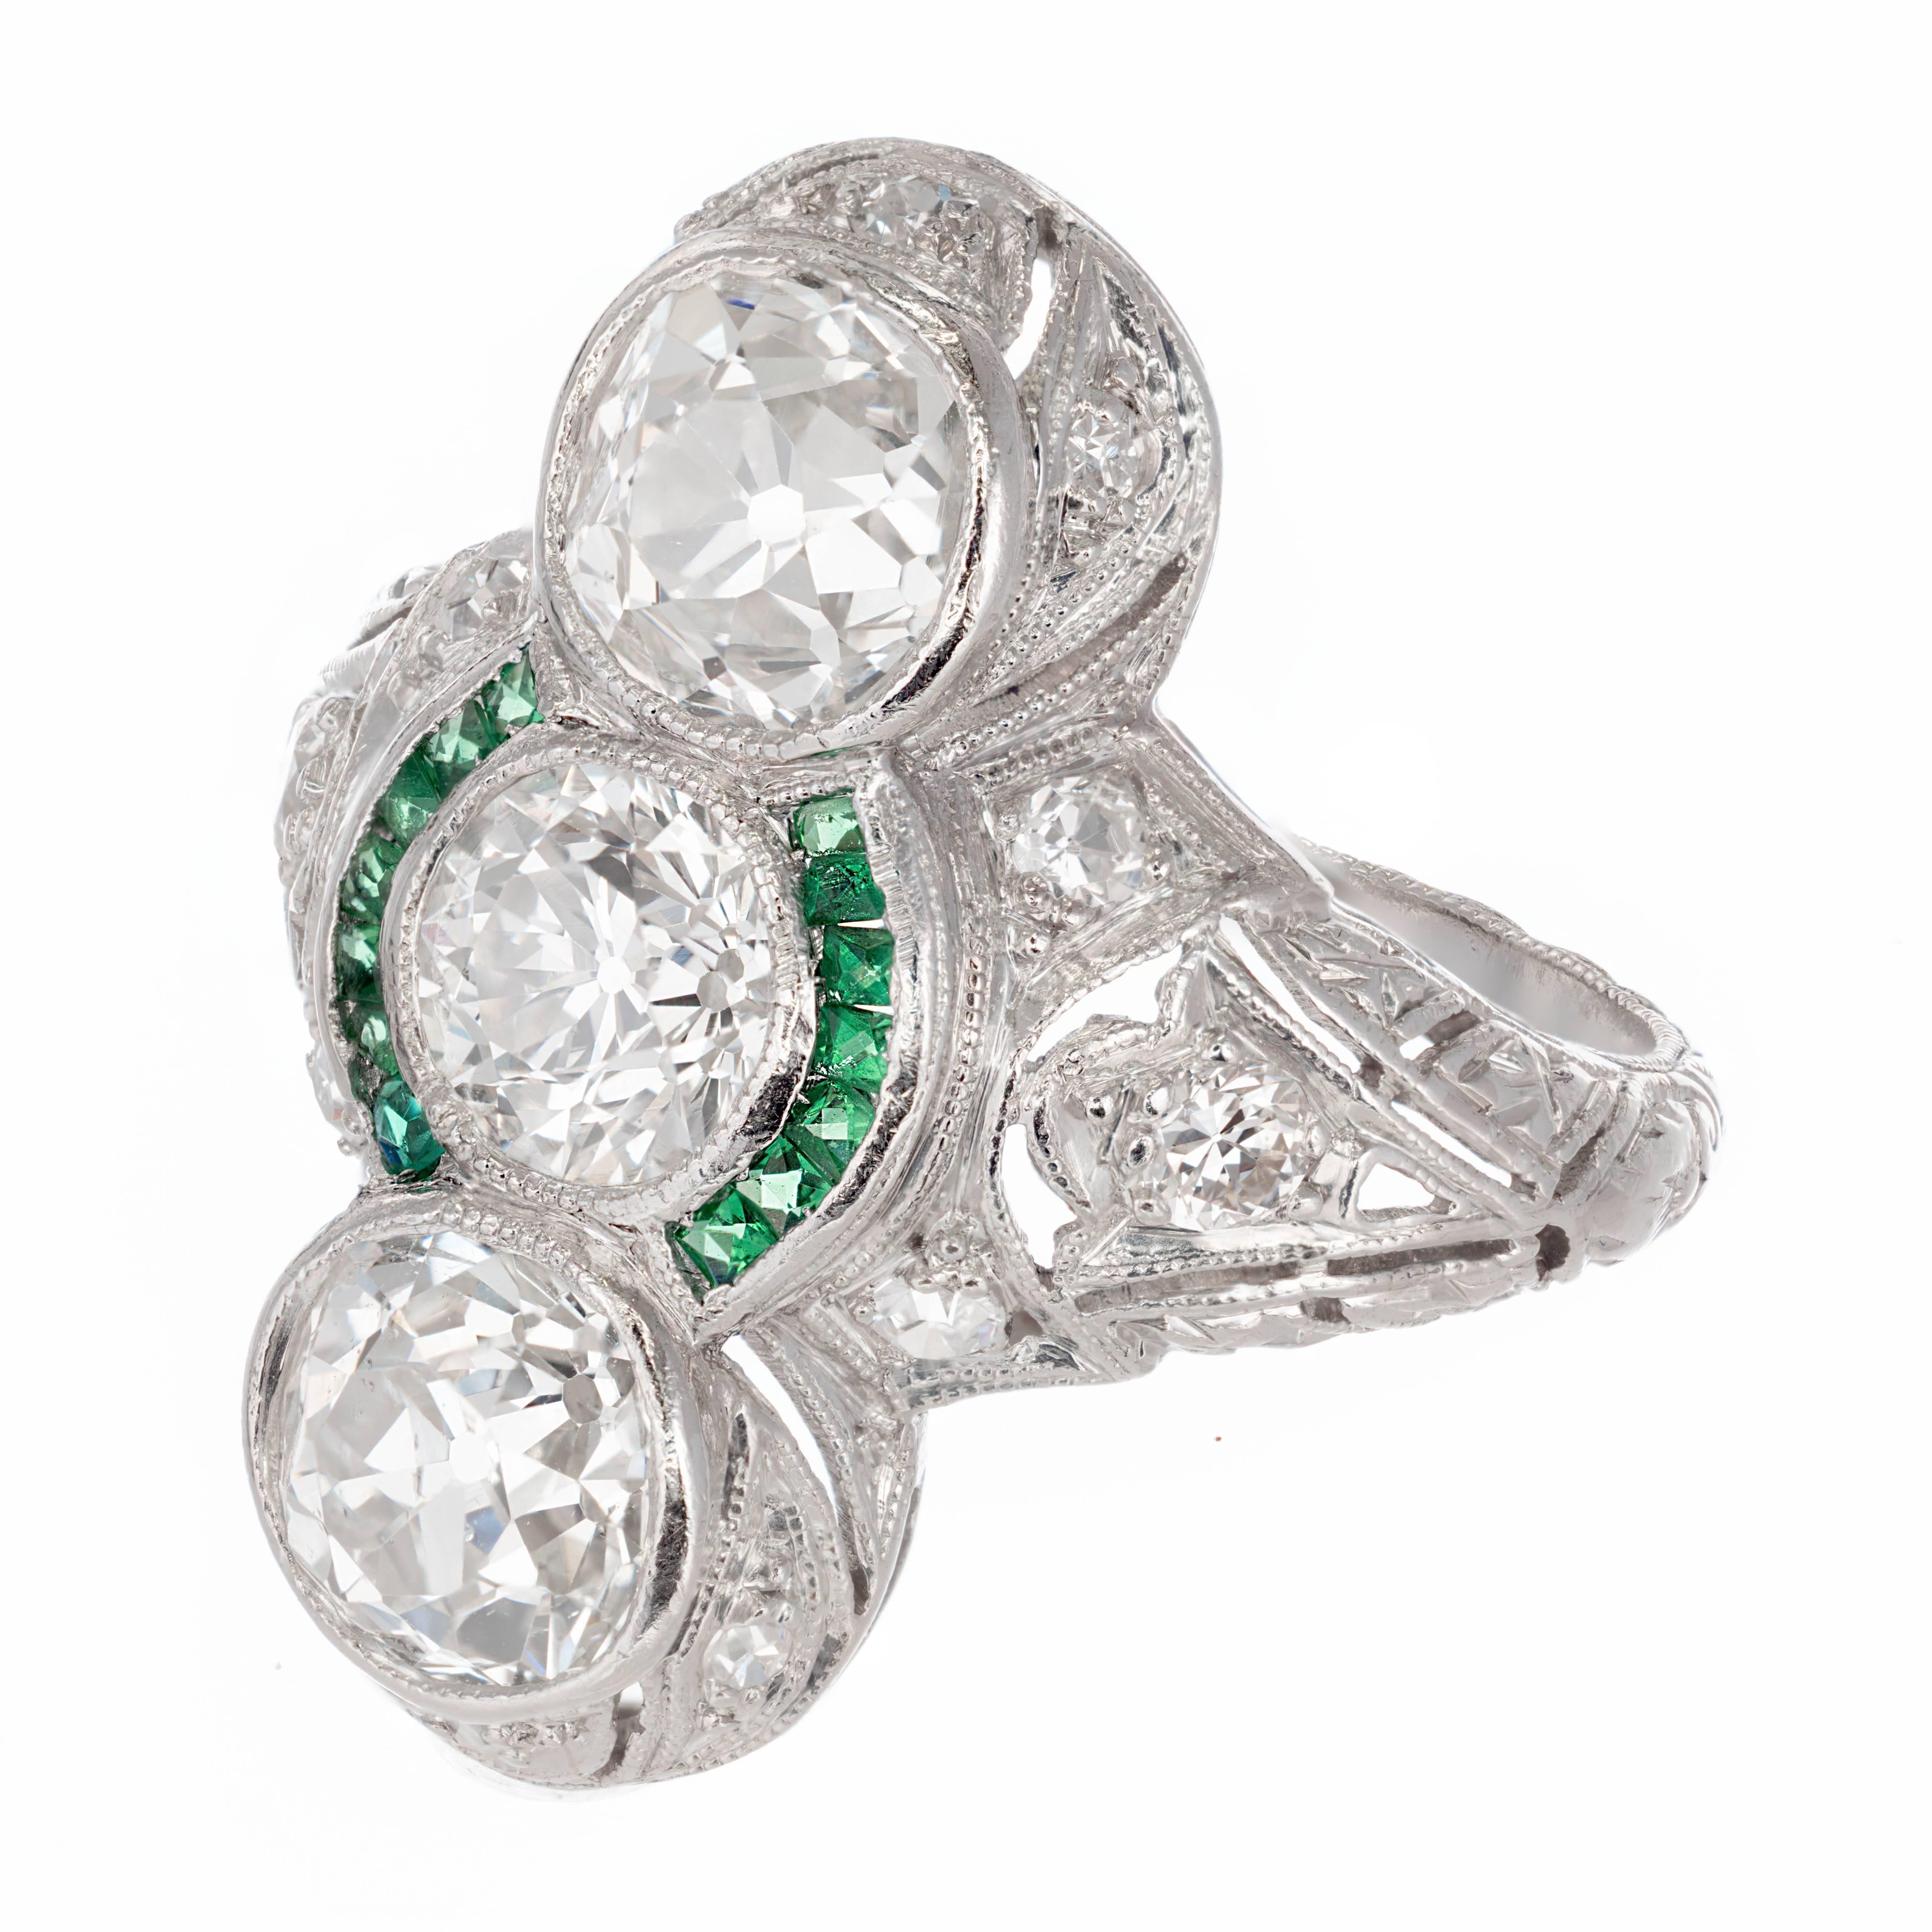 Handmade original Art Deco three-stone diamond and emerald cocktail ring. Handmade piercing, hand engraving and wonderful bright sparkly old European cut diamonds with a genuine Emerald halo. Circa 1910.

1 old European cut center diamond, approx.